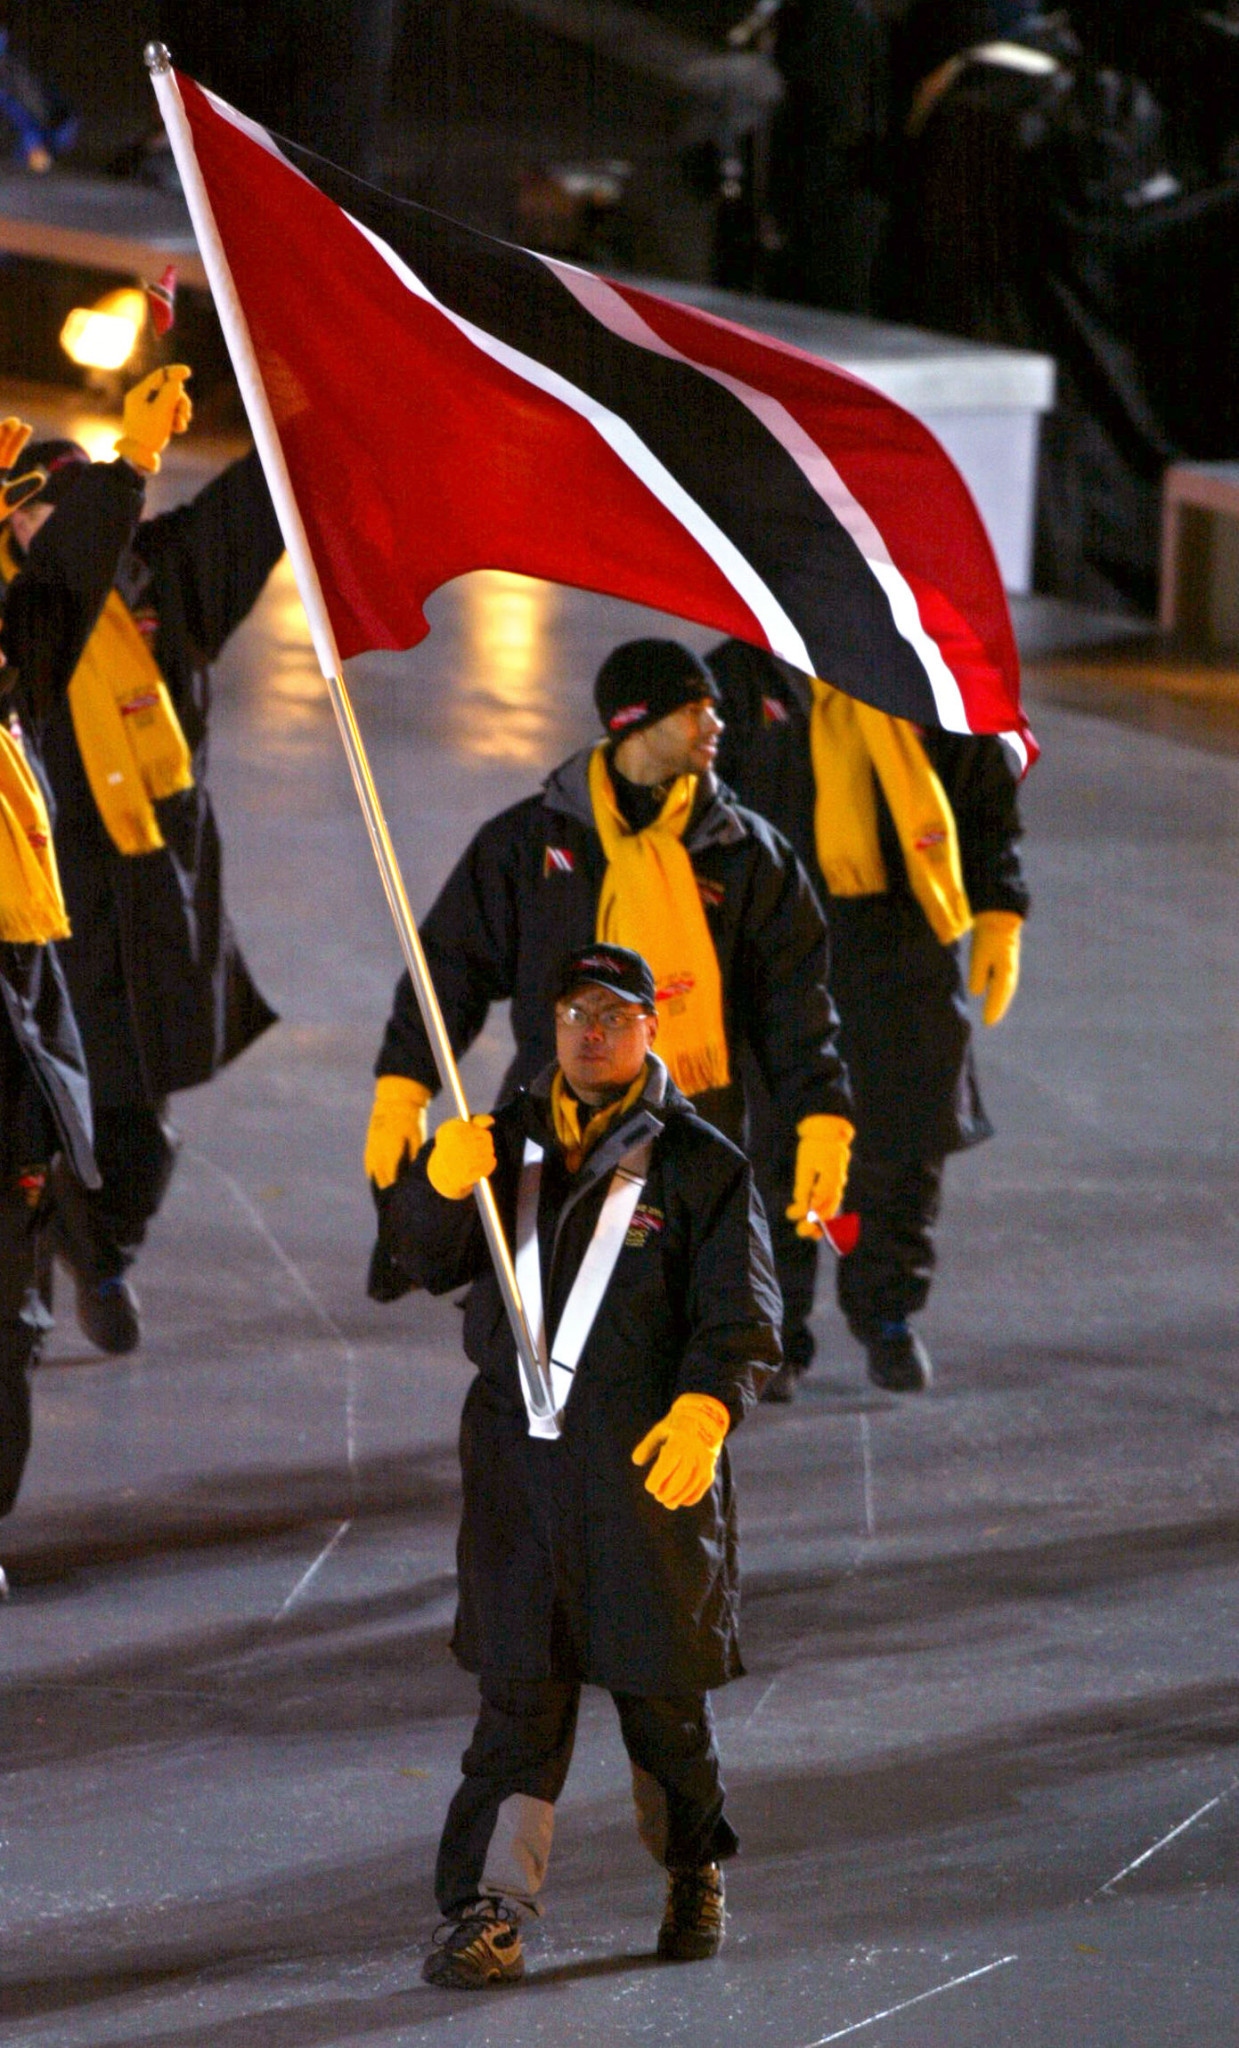 Bobsledder Gregory Sun was Trinidad and Tobago's flag bearer when the country last participated at a Winter Olympic Games, in Salt Lake City in 2002 ©Getty Images